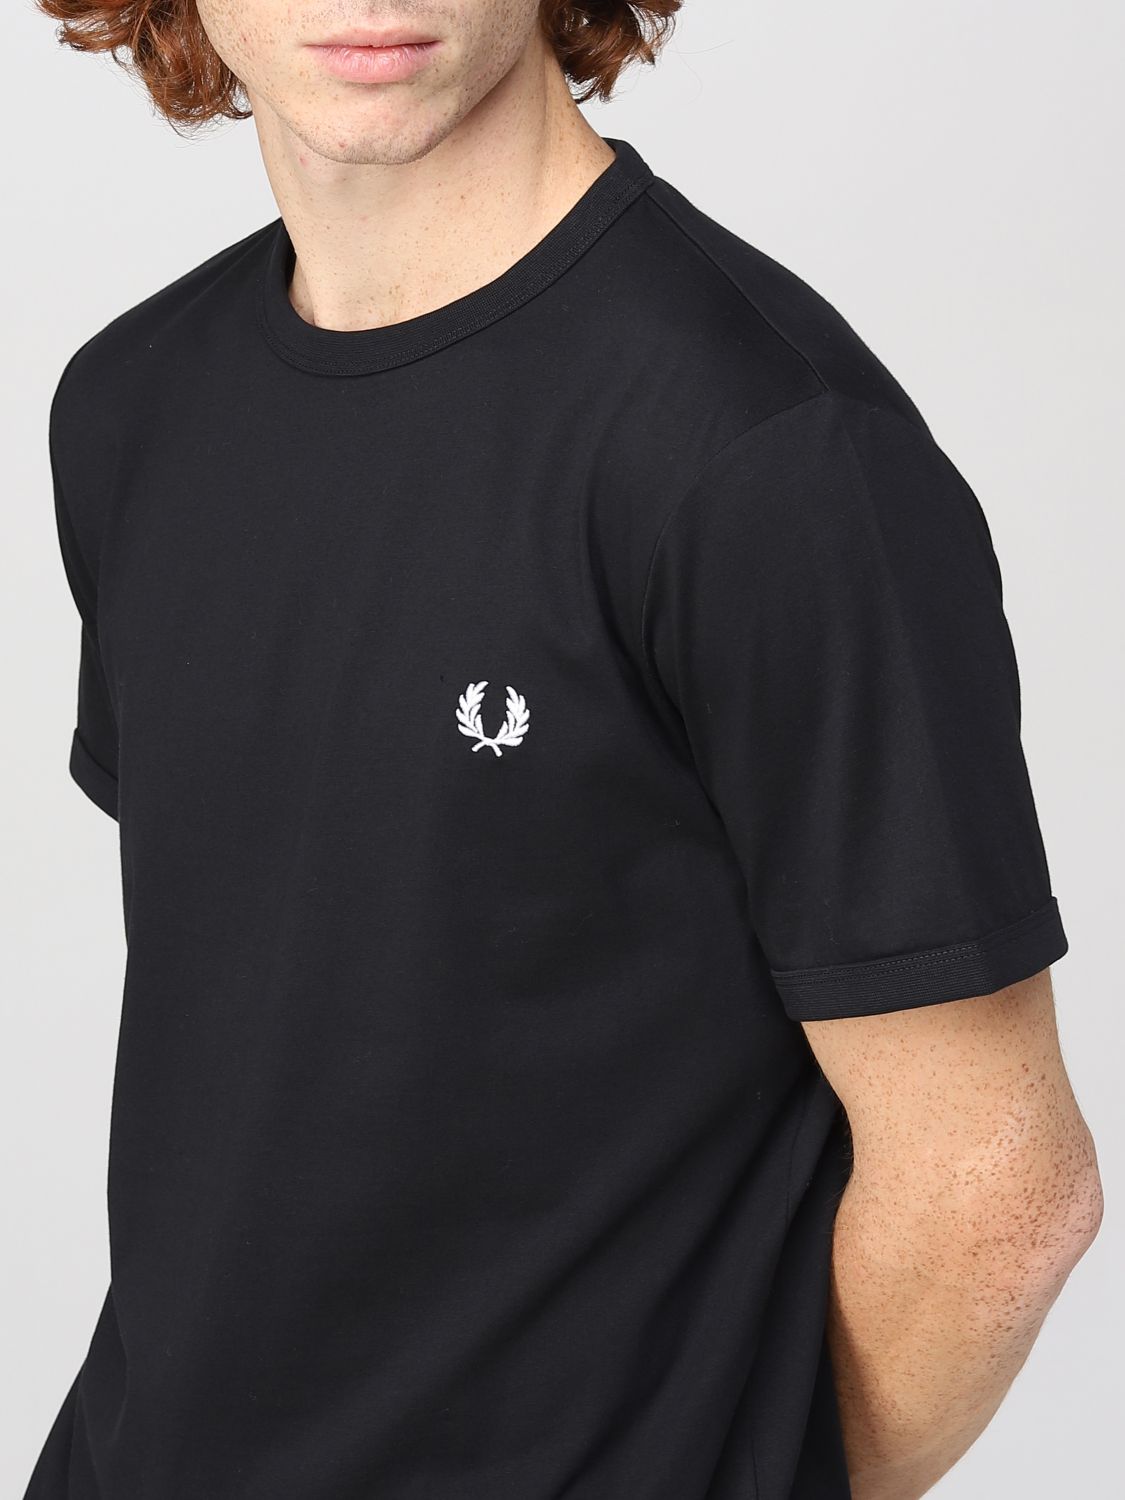 Tシャツ Fred Perry: Tシャツ Fred Perry メンズ ブラック 3